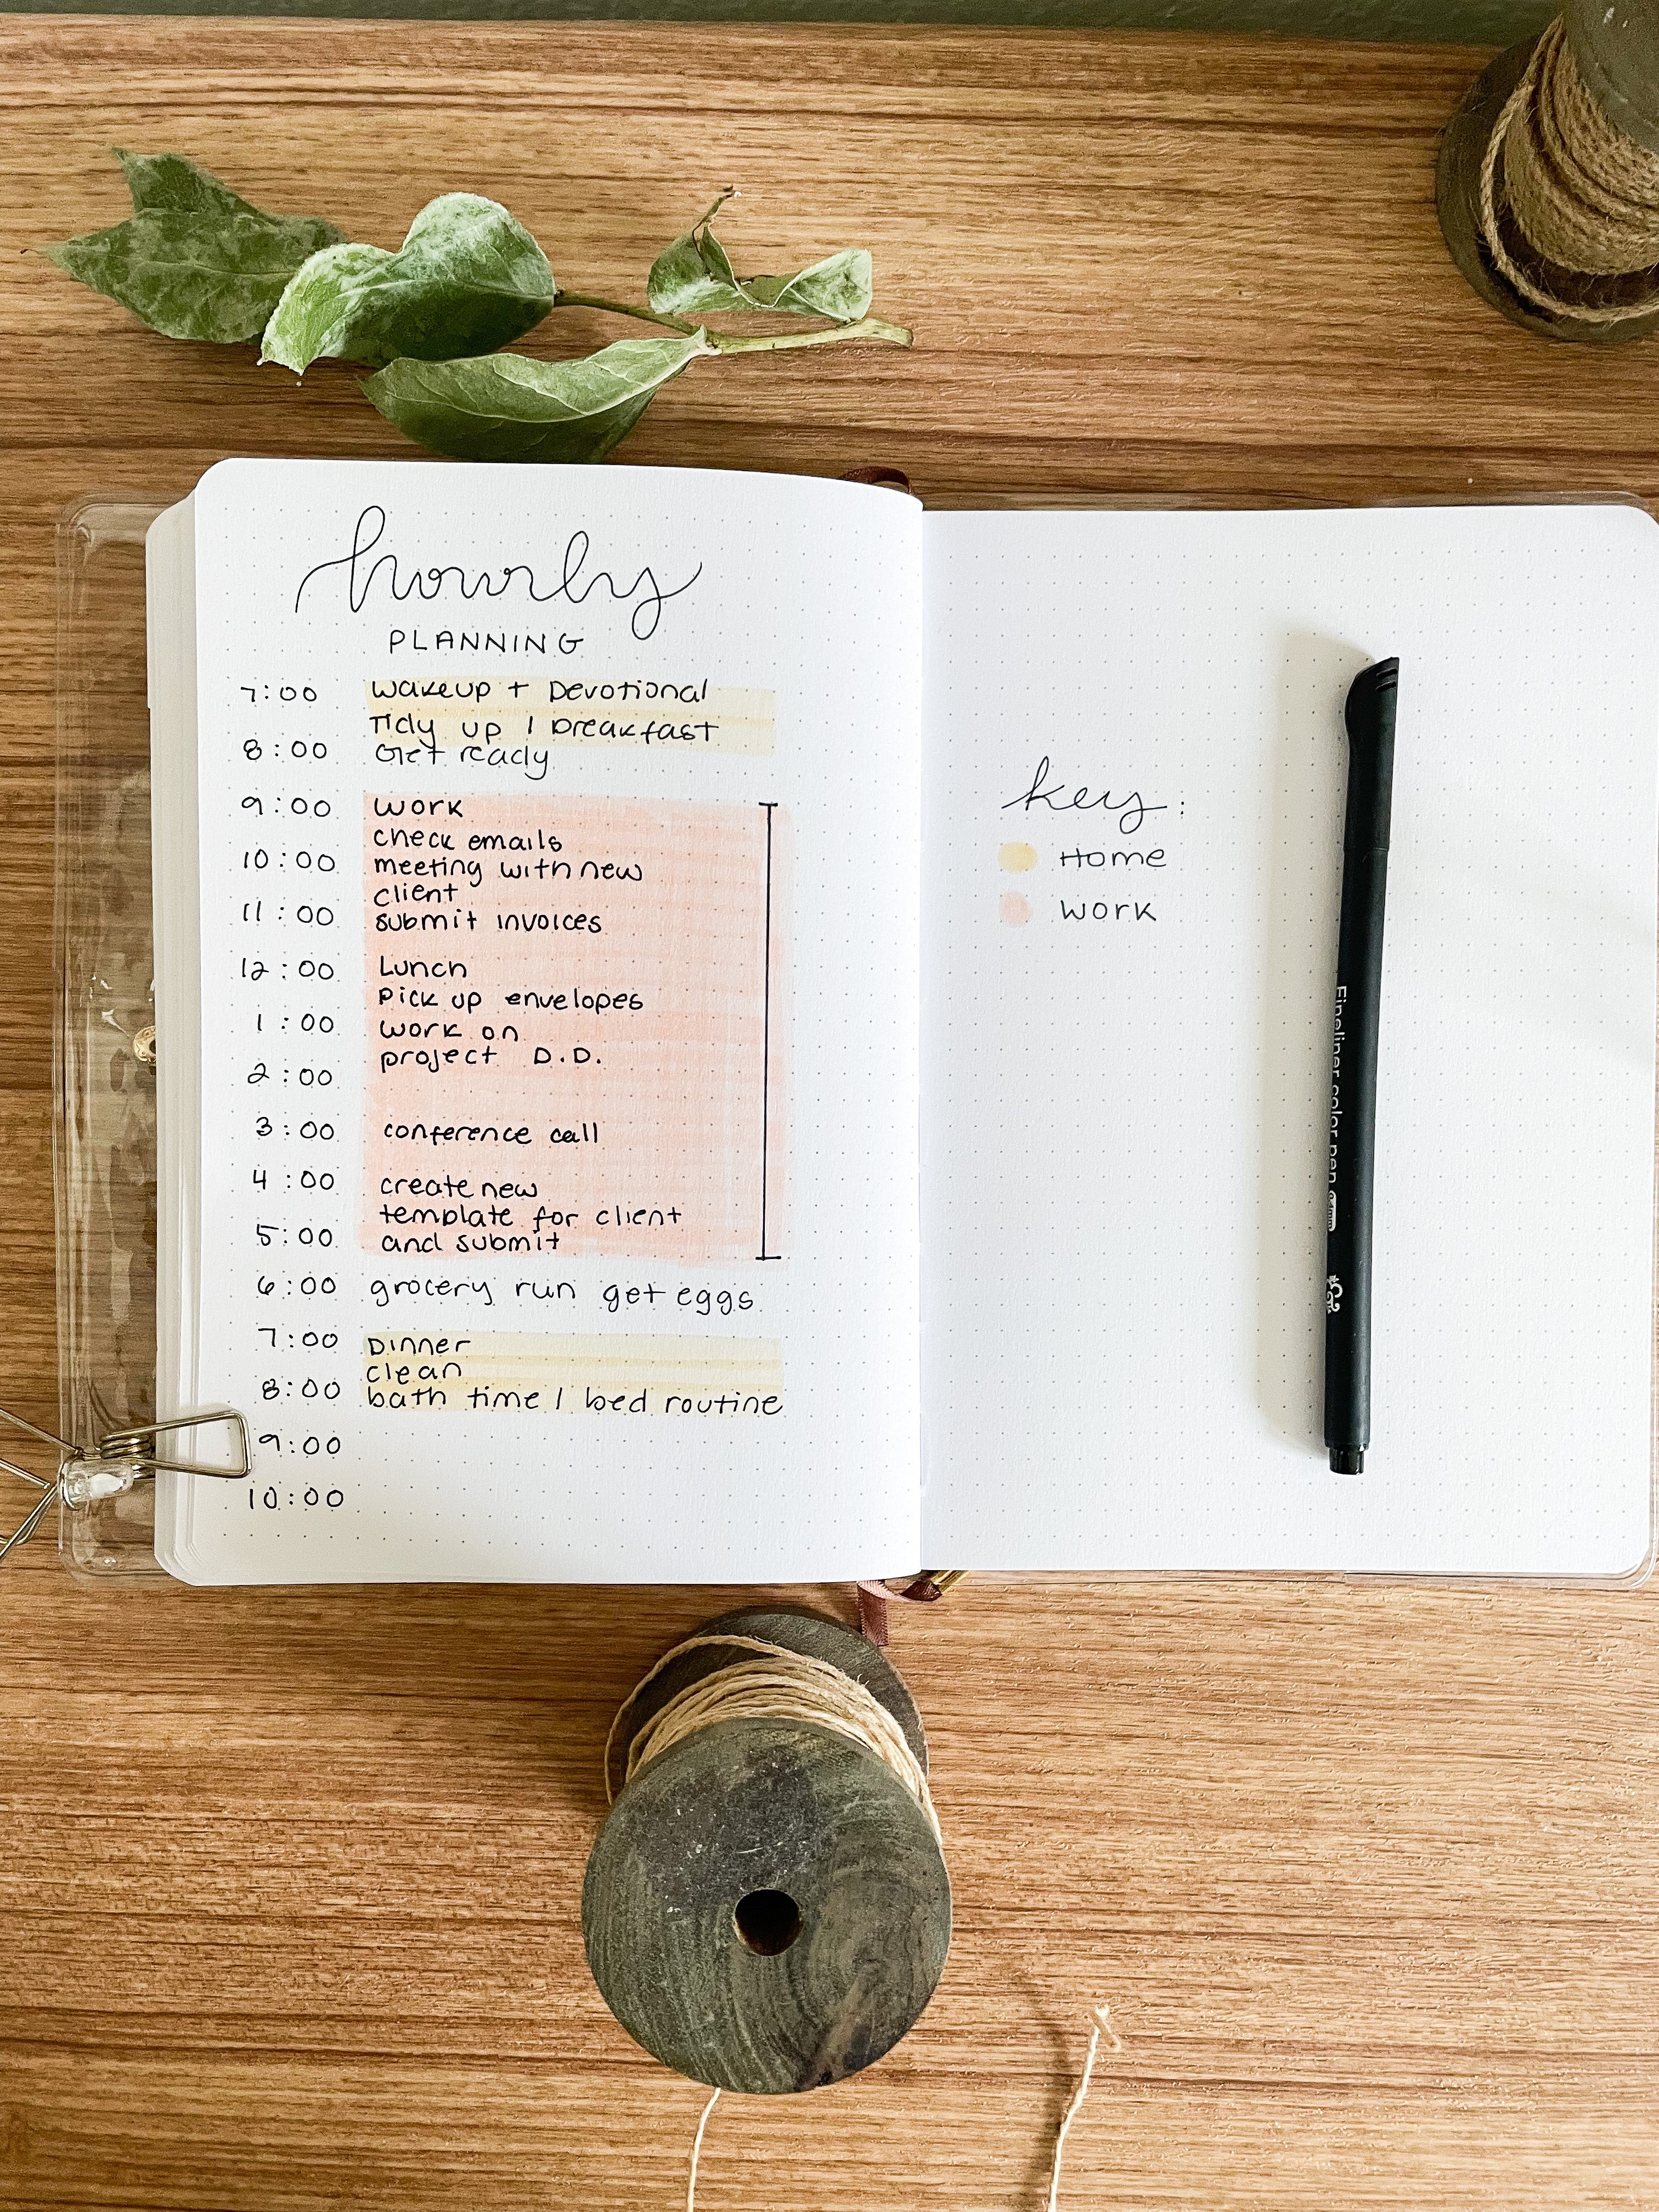 hourly planning with highlights